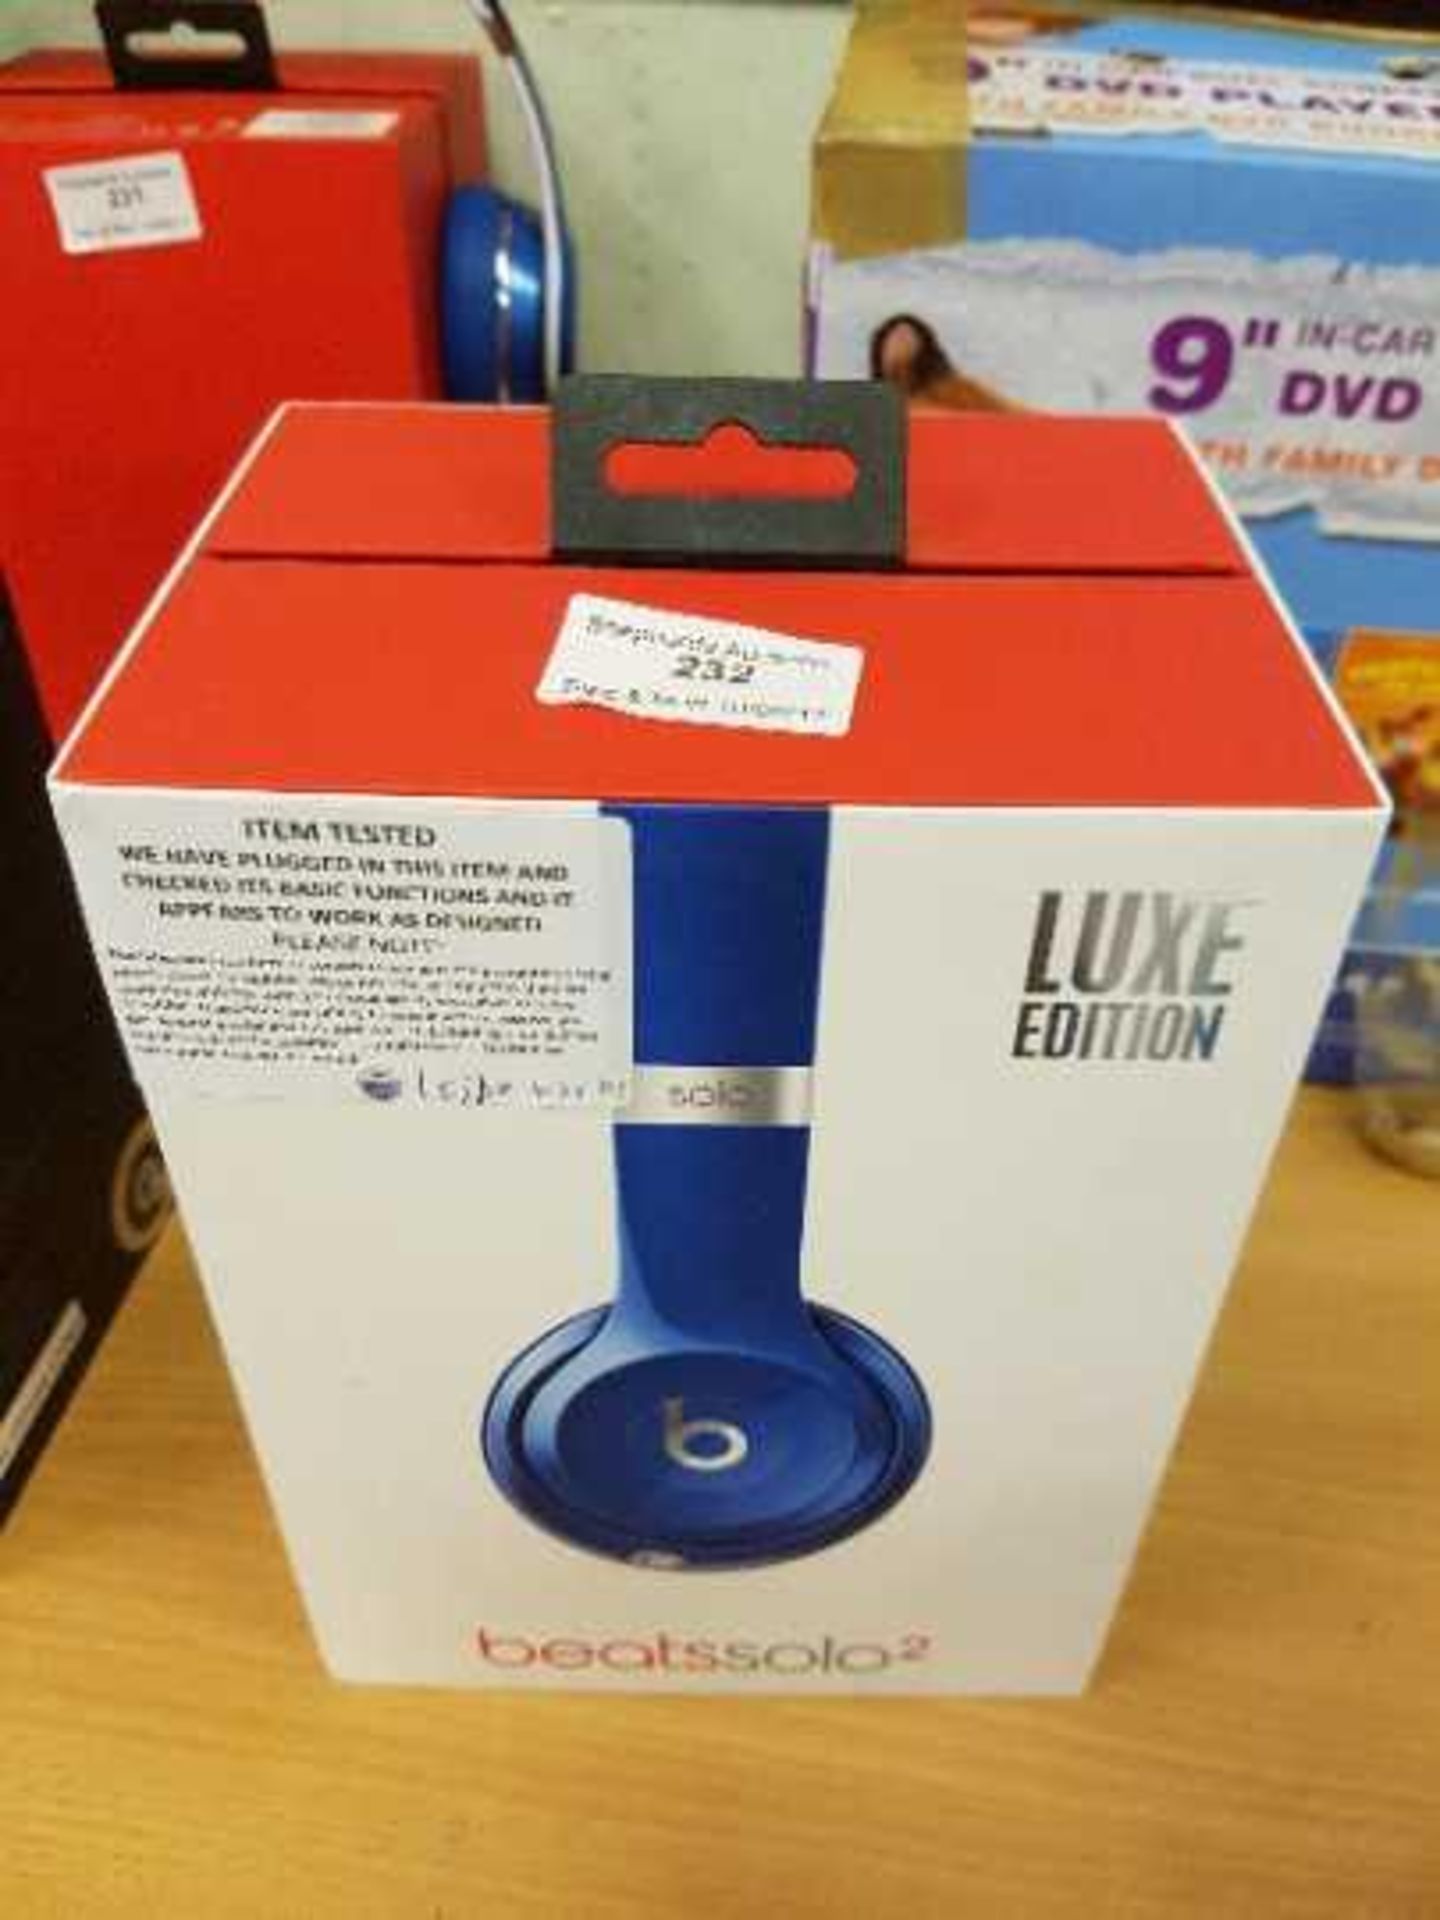 Beats solo 2 headphones, in original box, only one ear appears to work